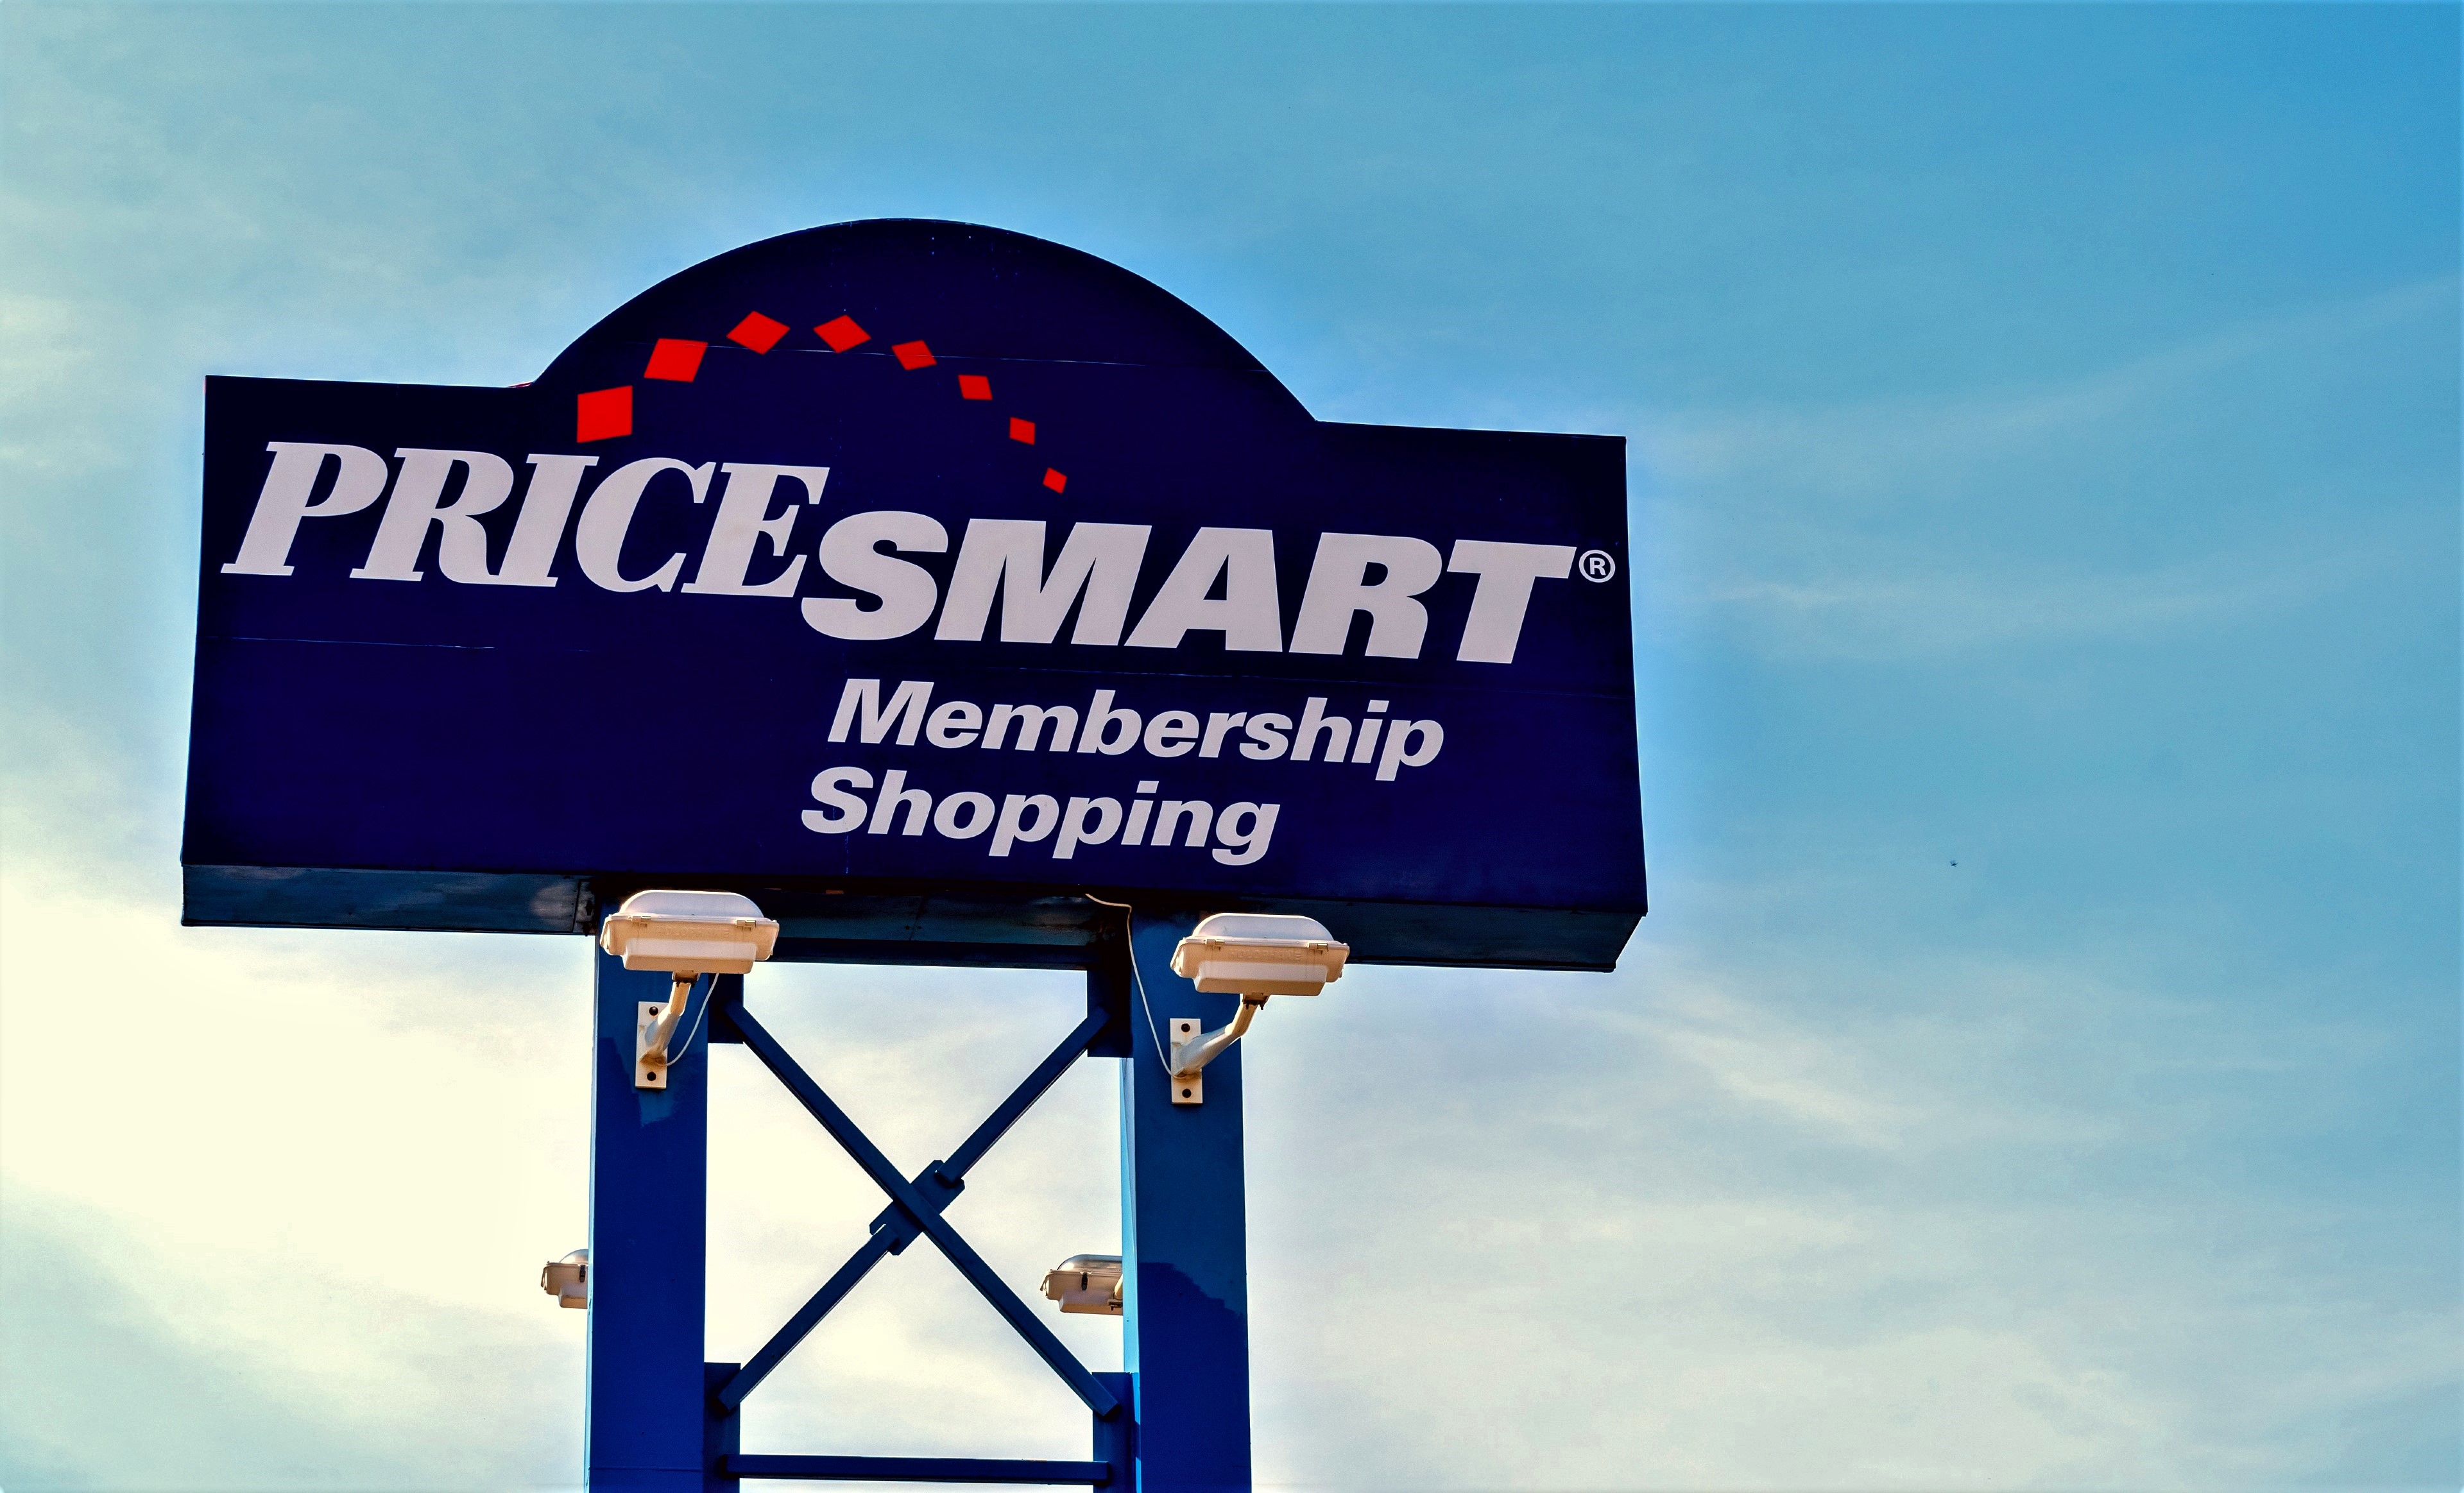 PriceSmart stock jumps 5%: Now what?